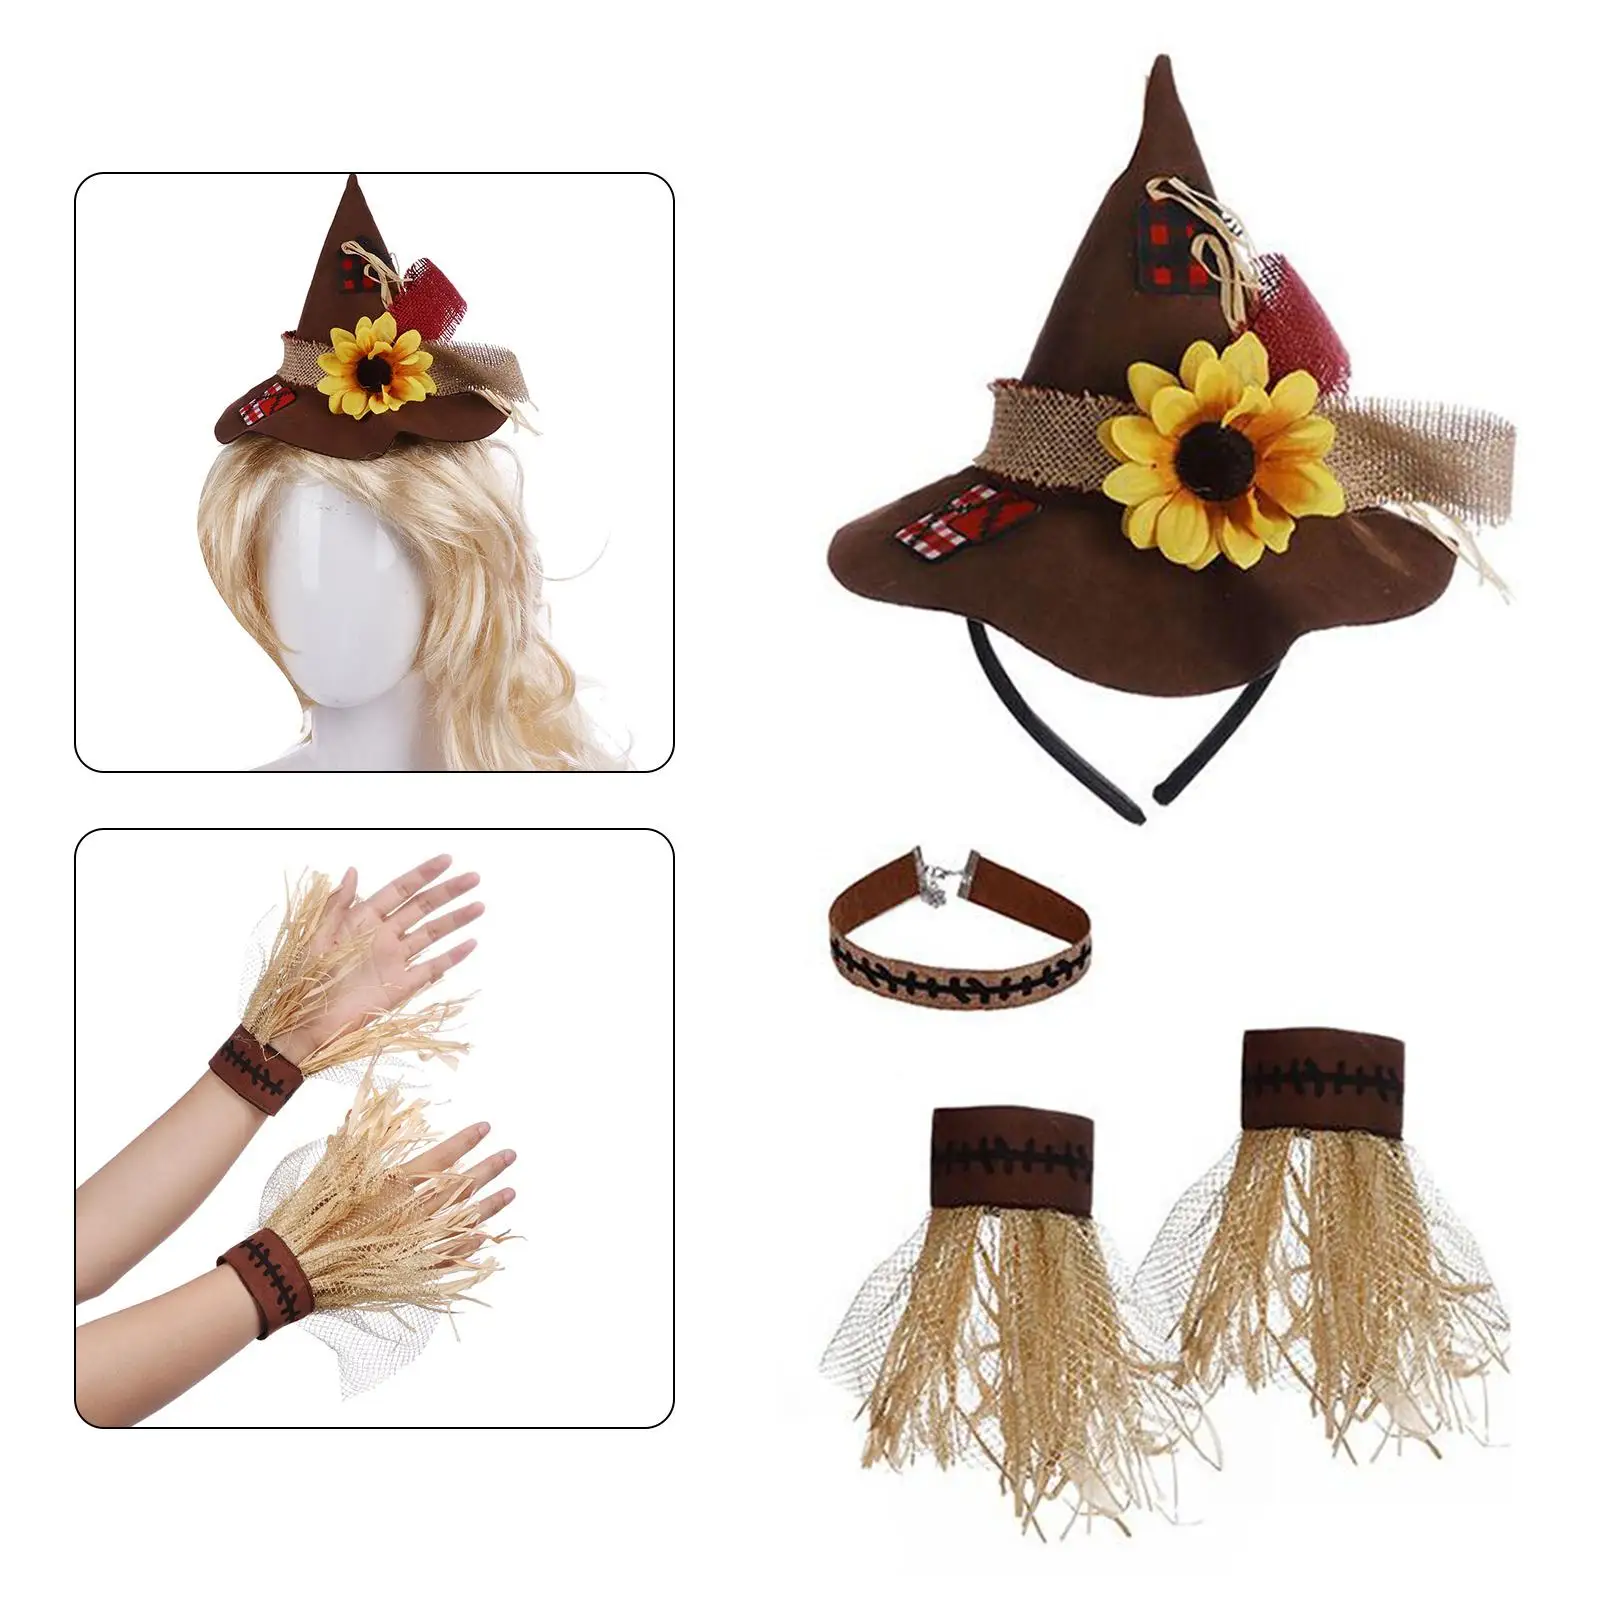 Novelty Halloween Party Costume Hat Necklace Gloves for Cosplay Festival Decoration